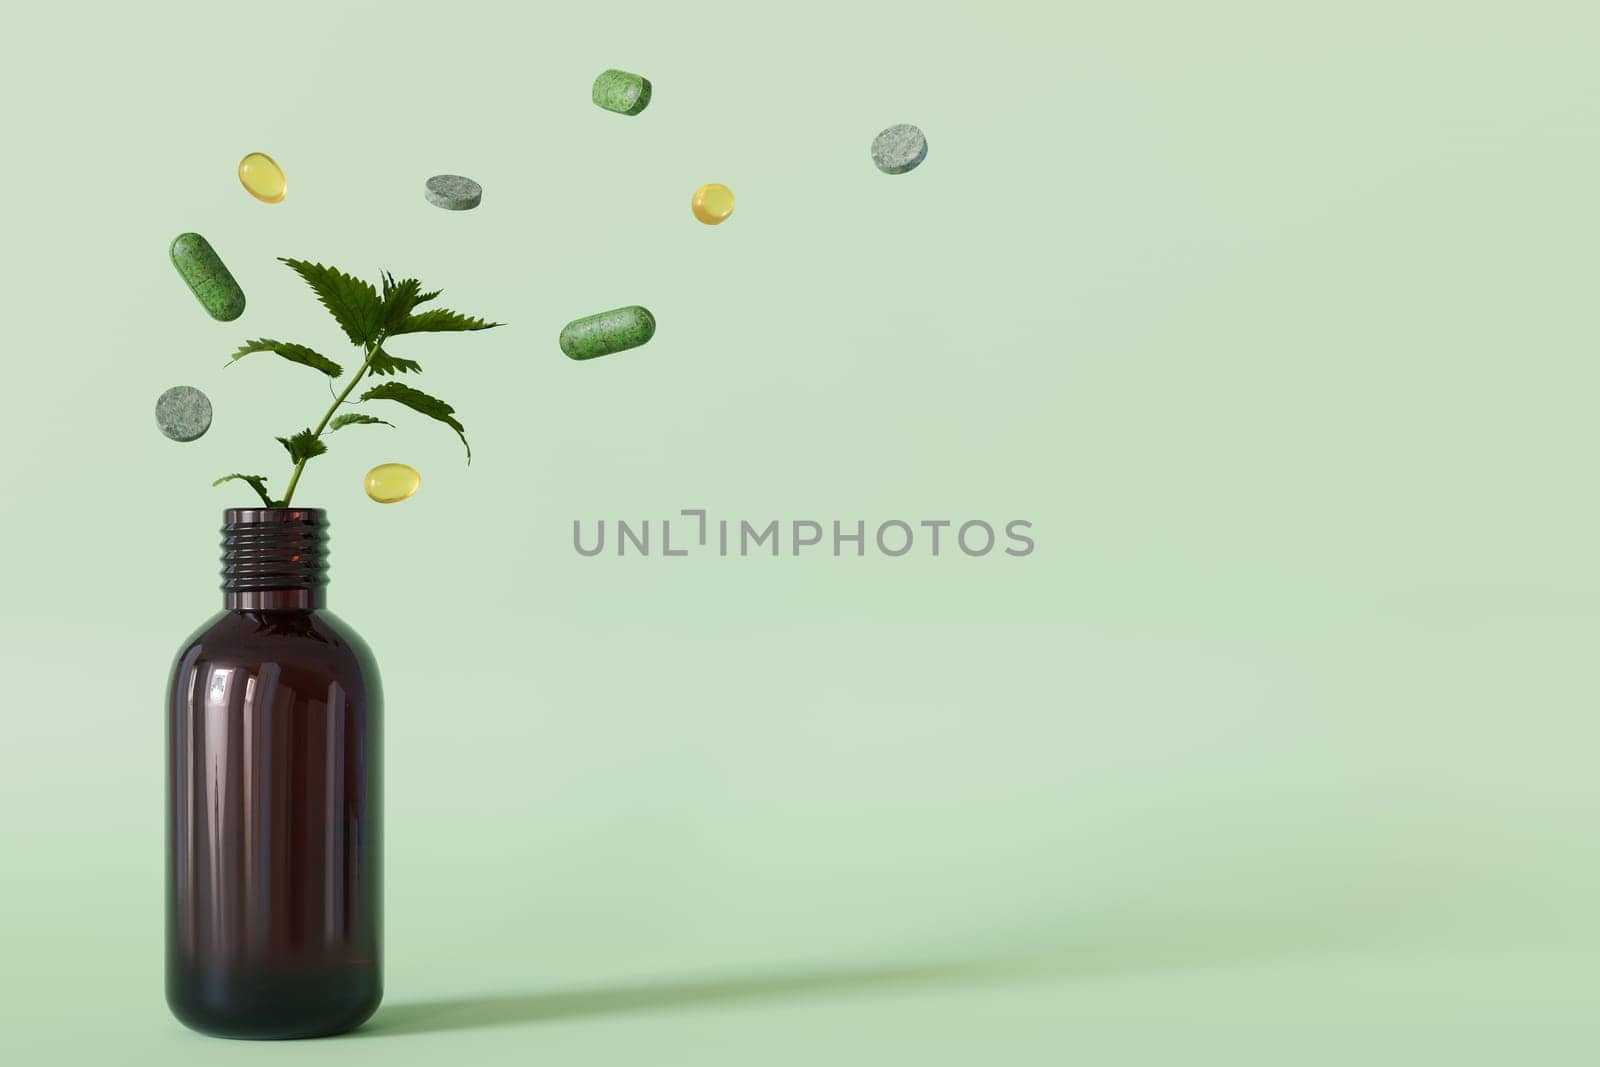 A dynamic composition with herbal pills and a plant sprouting from a bottle, illustrating the natural essence of homeopathic remedies. Copy space for text. Alternative medicine. 3D render